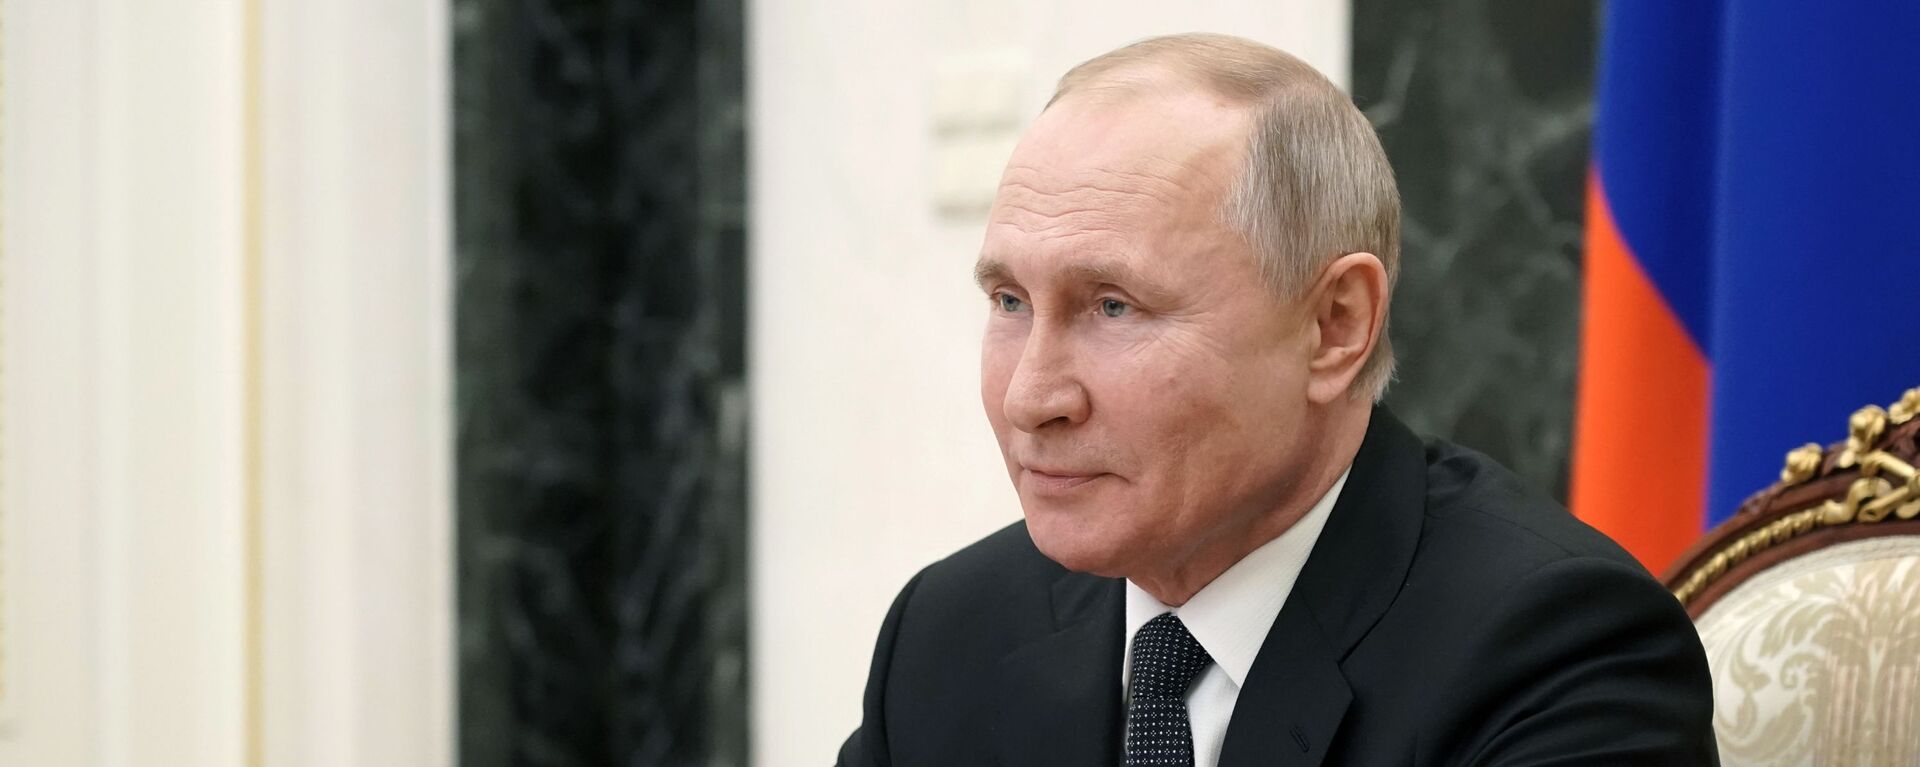 February 26, 2021. Russian President Vladimir Putin is holding an operational meeting with permanent members of the Russian Security Council via videoconference. - Sputnik International, 1920, 18.06.2021